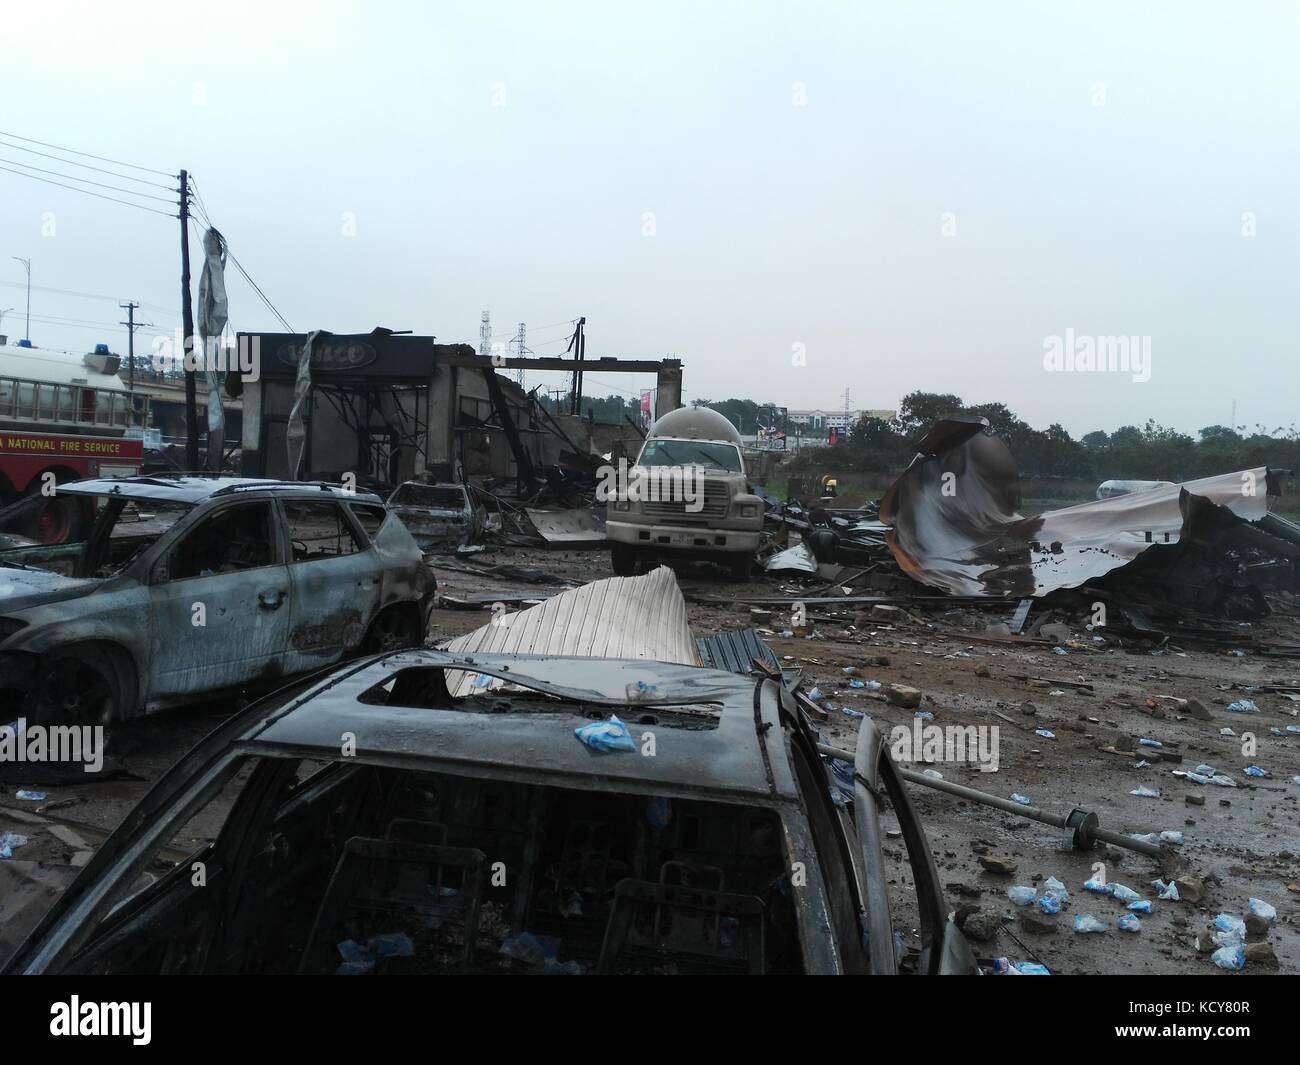 Accra, Ghana. 8th Oct, 2017. Wreckage of cars are seen at the explosion site of a gas station in north Accra, capital of Ghana, Oct. 8, 2017. The number of people killed in the Saturday night gas explosion at a fuel station in Ghana's capital city Accra has gone up to six, with 35 injured, deputy spokesman of the Ghana National Fire Service (GNFS) Prince Billy Anaglate told Xinhua on Sunday. Credit: Justice Adoboe/Xinhua/Alamy Live News Stock Photo